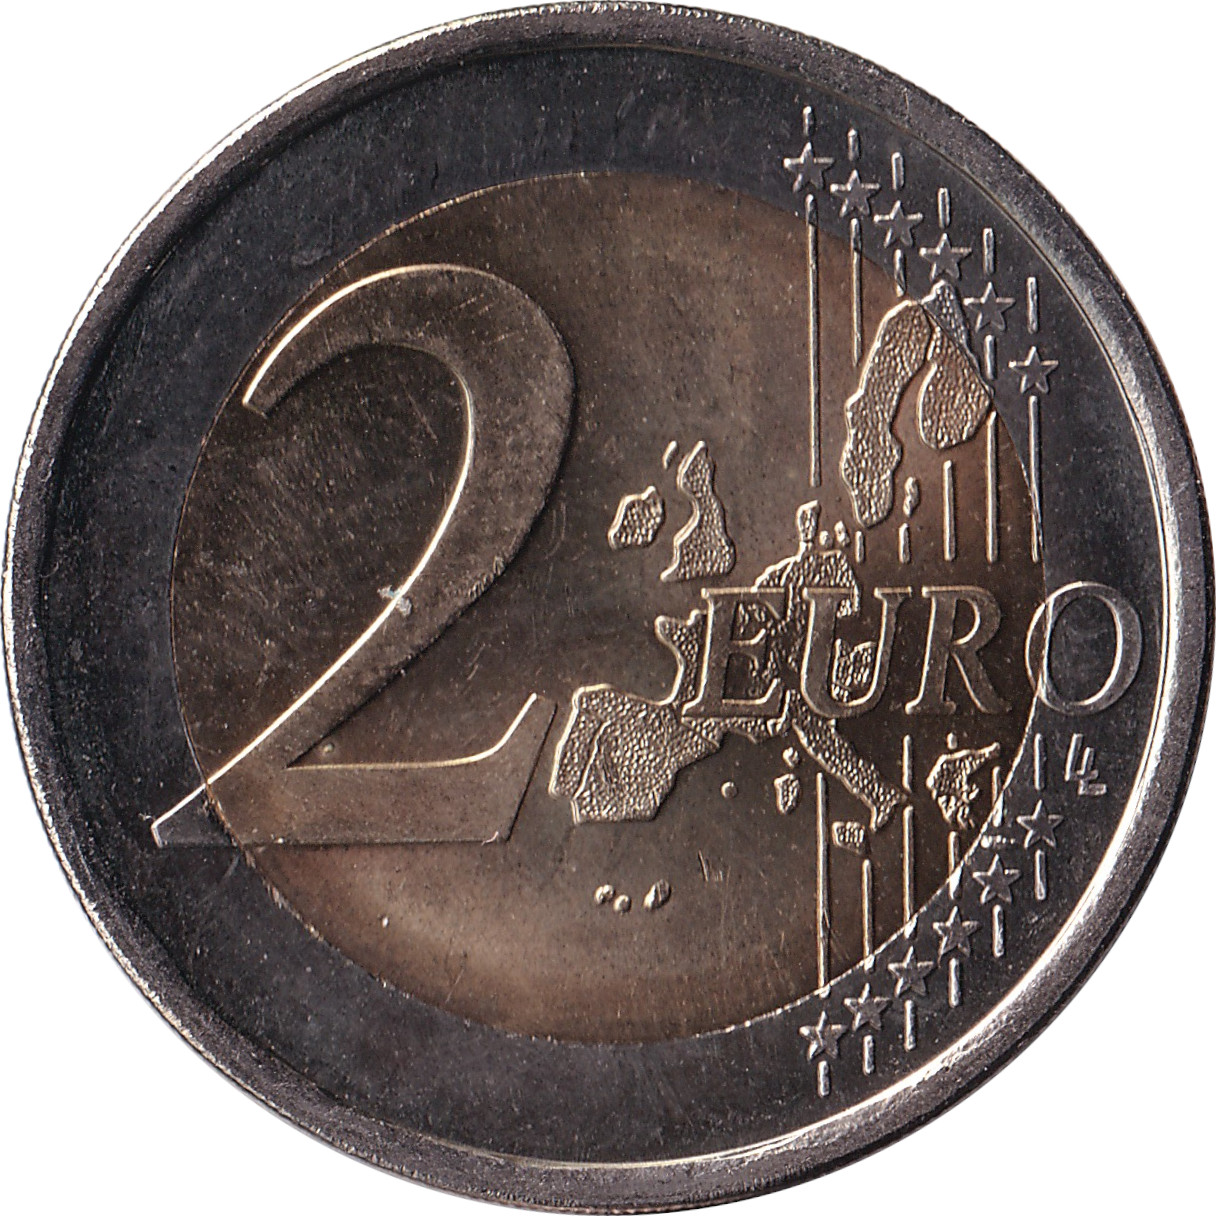 2 euro - Adhésion aux Nations Unies - 50 years